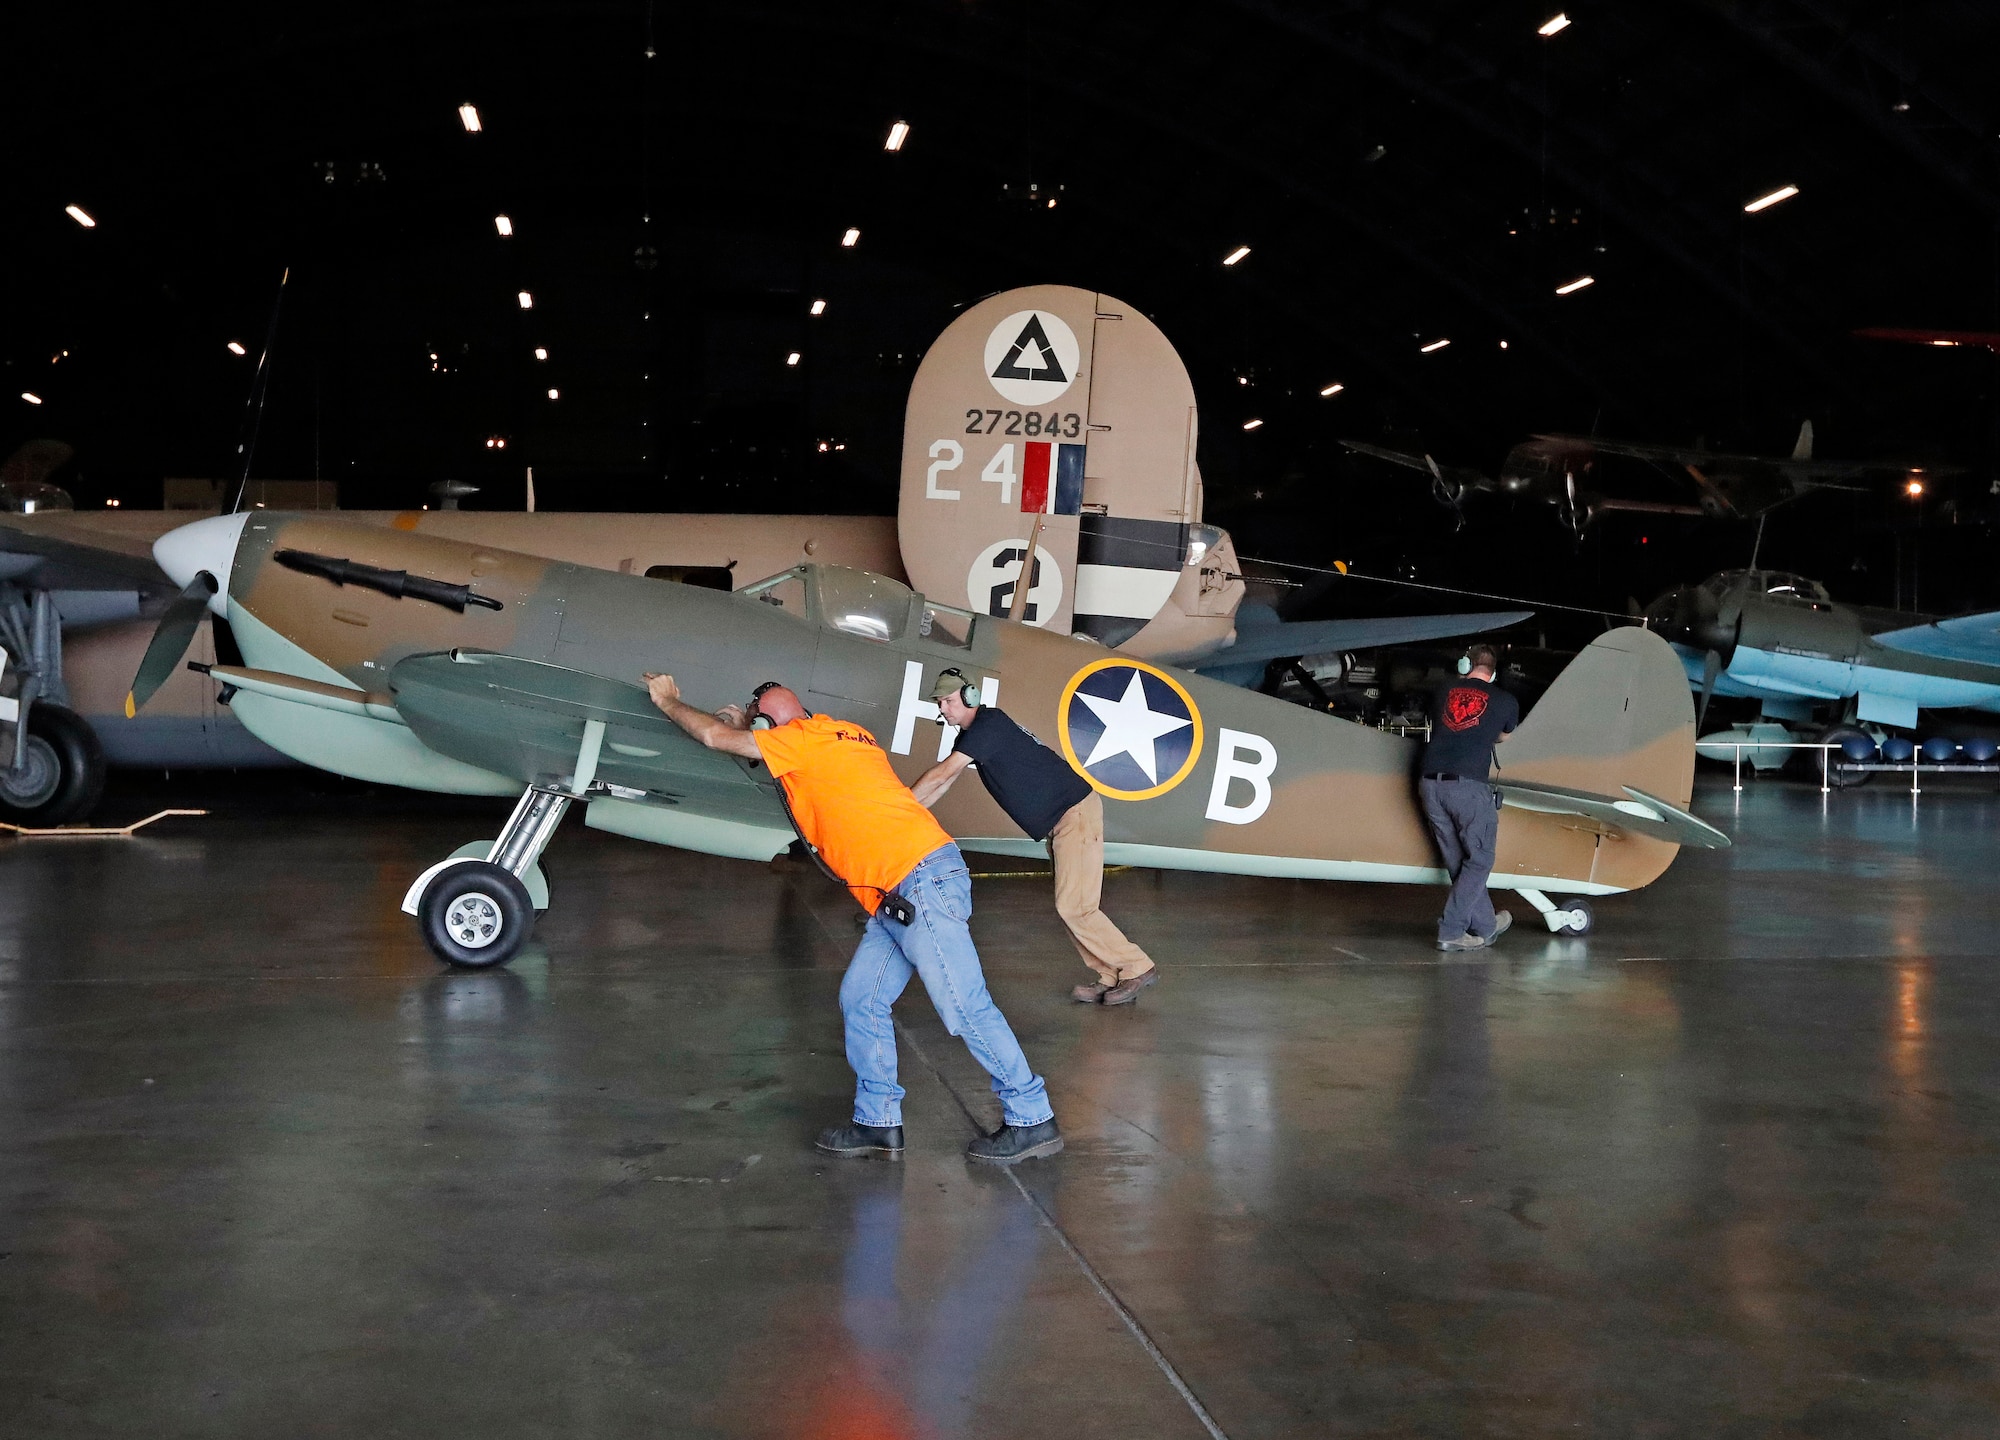 DAYTON, Ohio -- Supermarine Spitfire Mk. Vc in the WWII Gallery at the National Museum of the United States Air Force. (Courtesy photo by Don Popp)